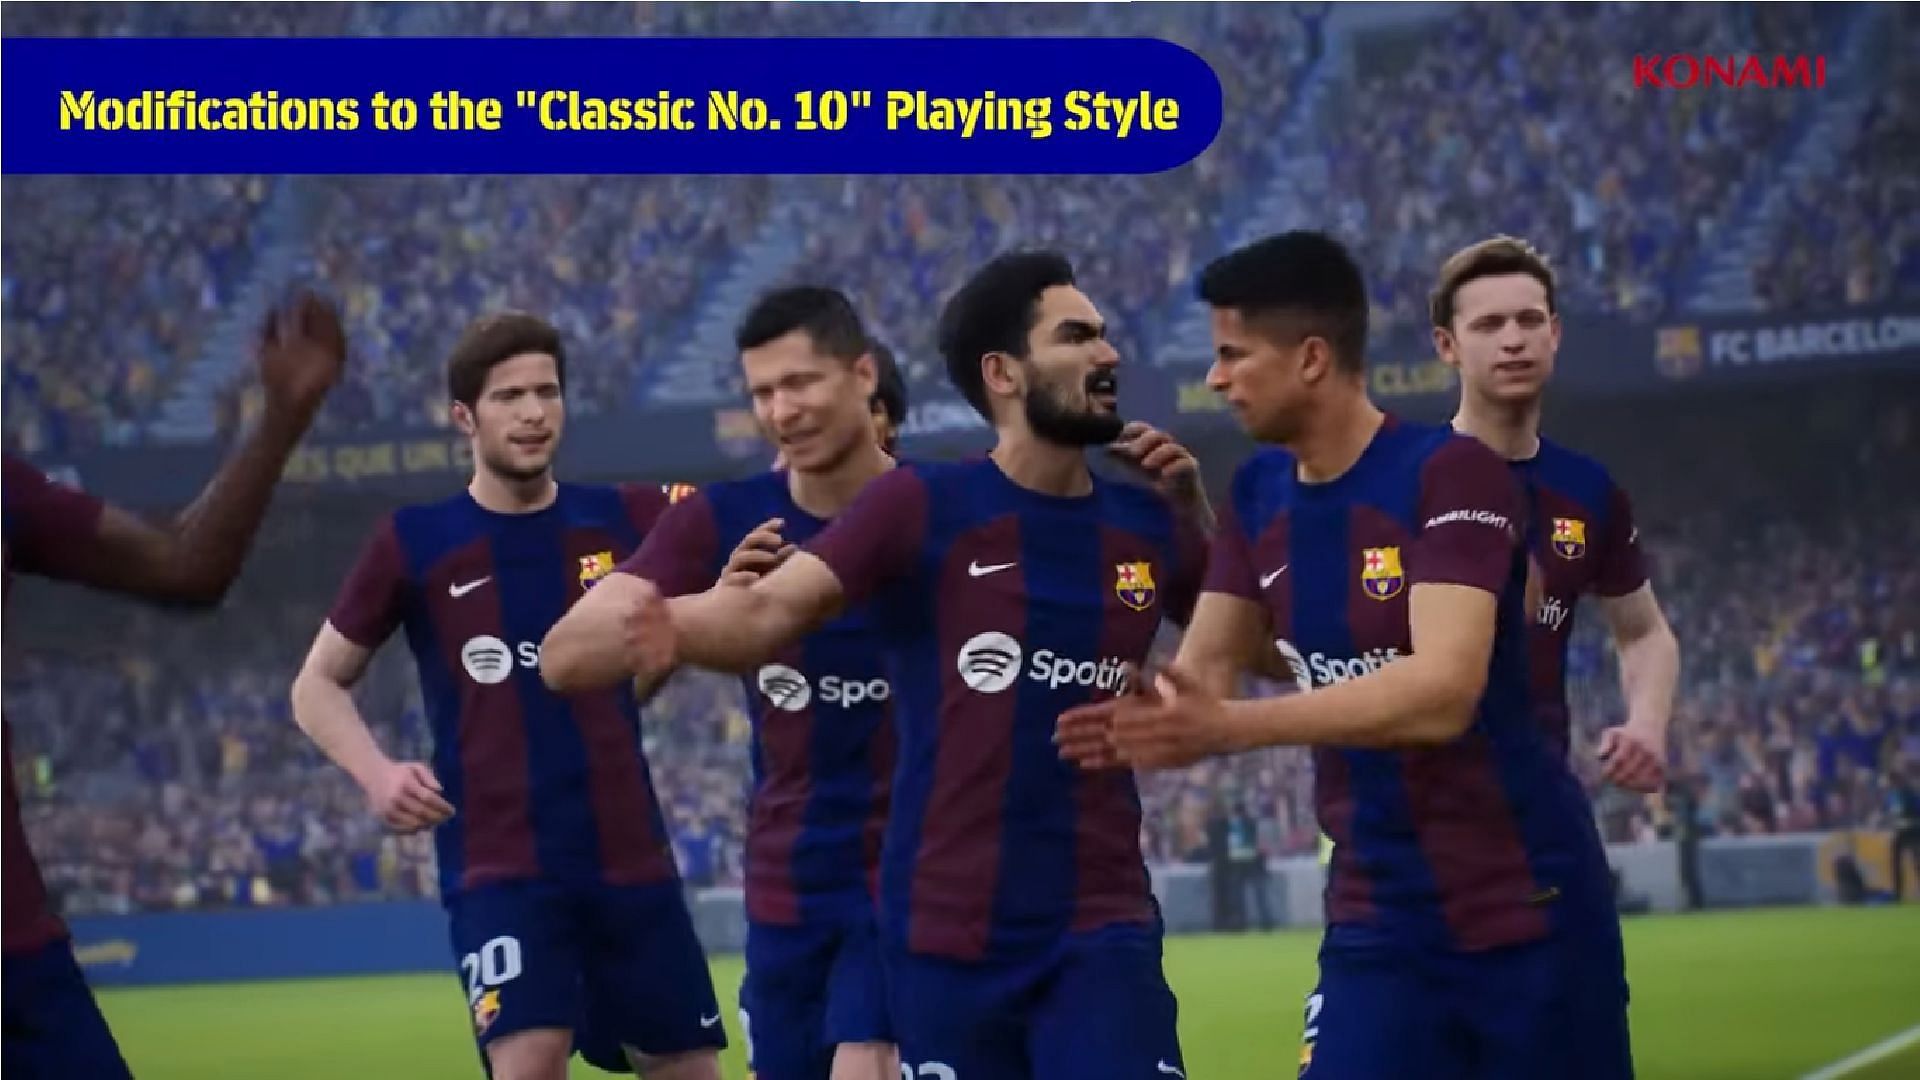 There are some adjustments made to the play style of the No.10s to make build-ups scarier than ever (Image via Konami)